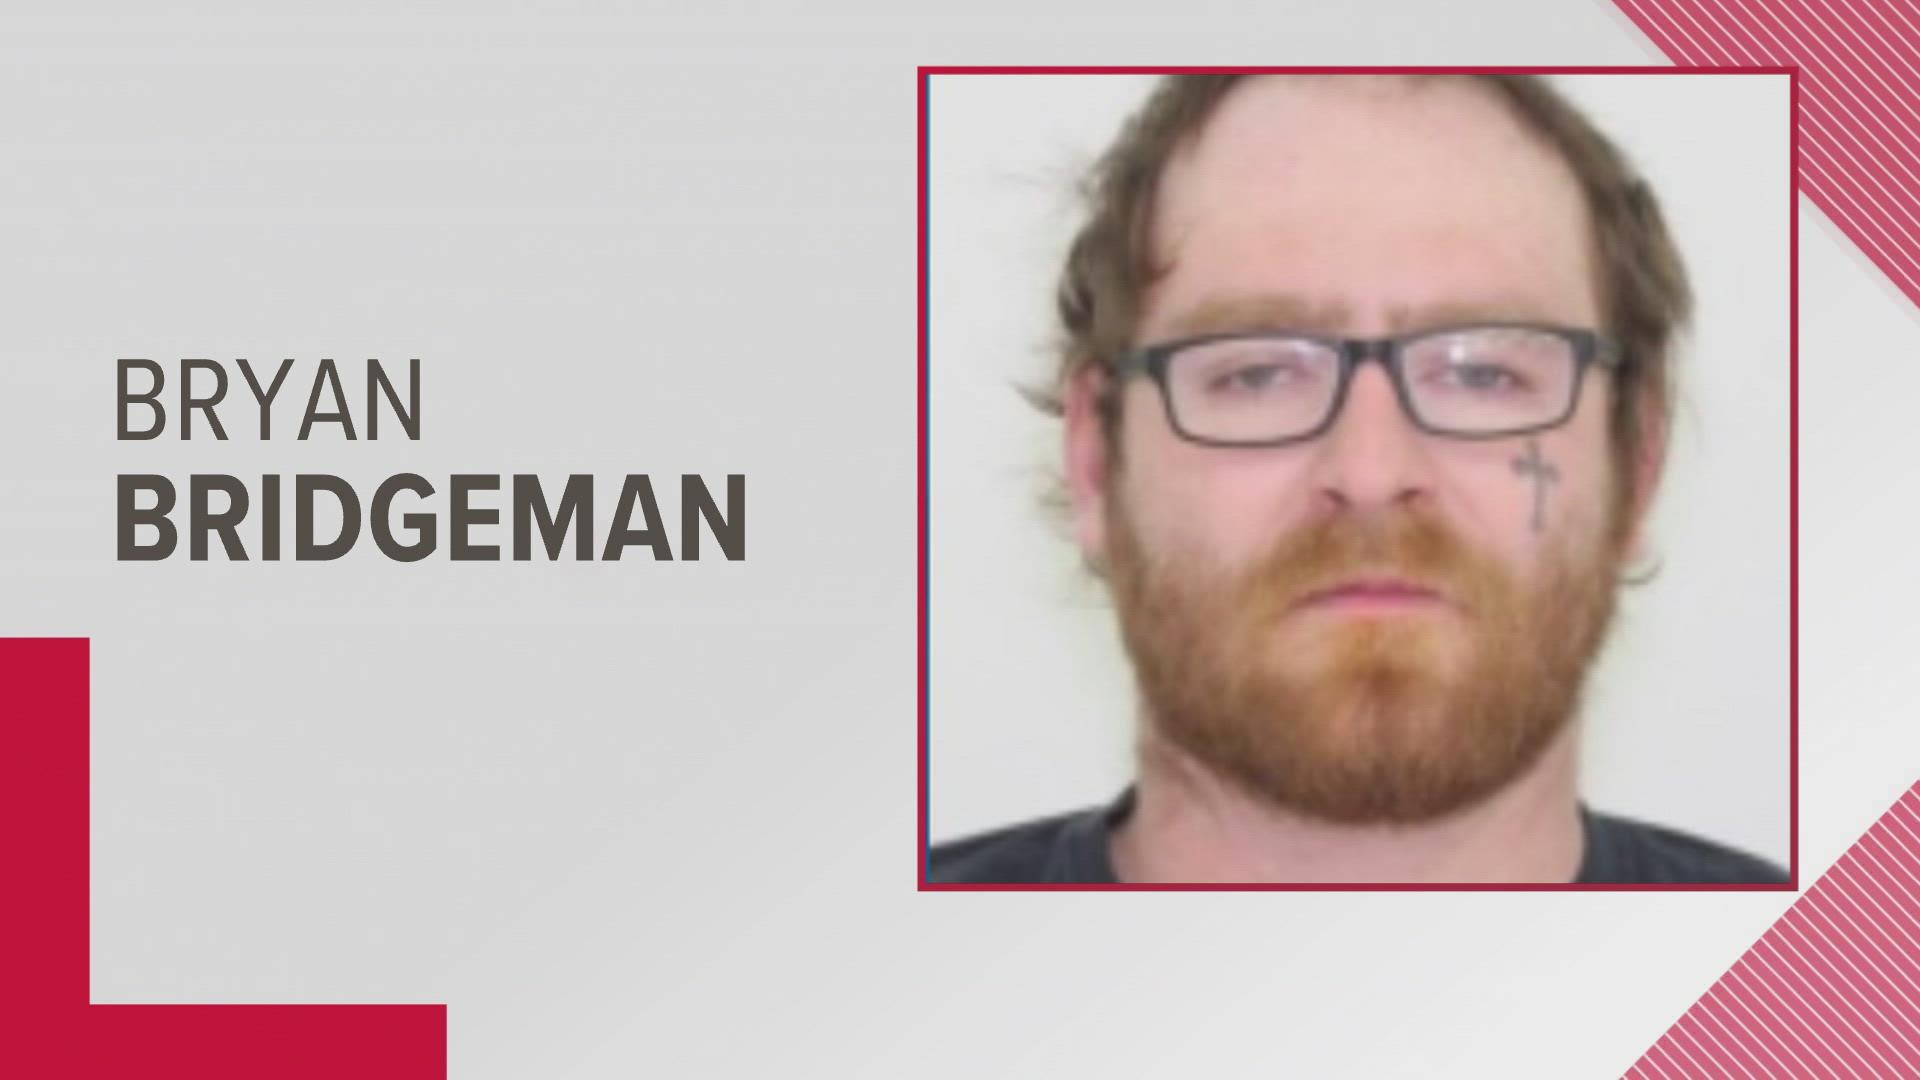 Bryan Bridgeman, 30, was last seen leaving his Nelsonville home on June 4 and was officially reported missing on June 7.